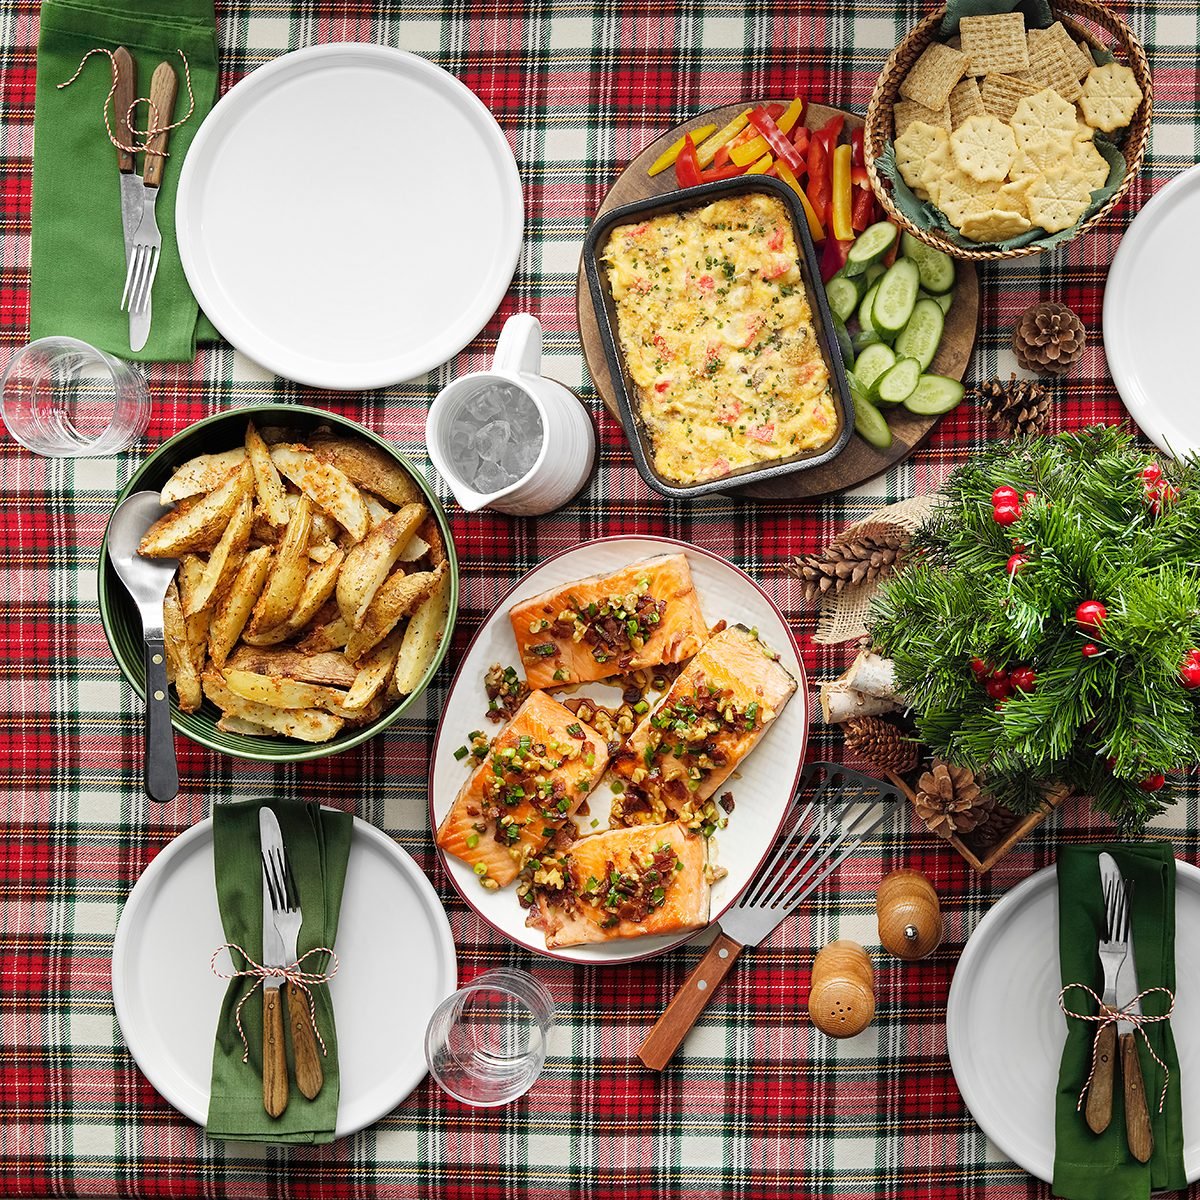 Christmas Dinner Menu Ideas - Plan a Memorable Meal for Your Family